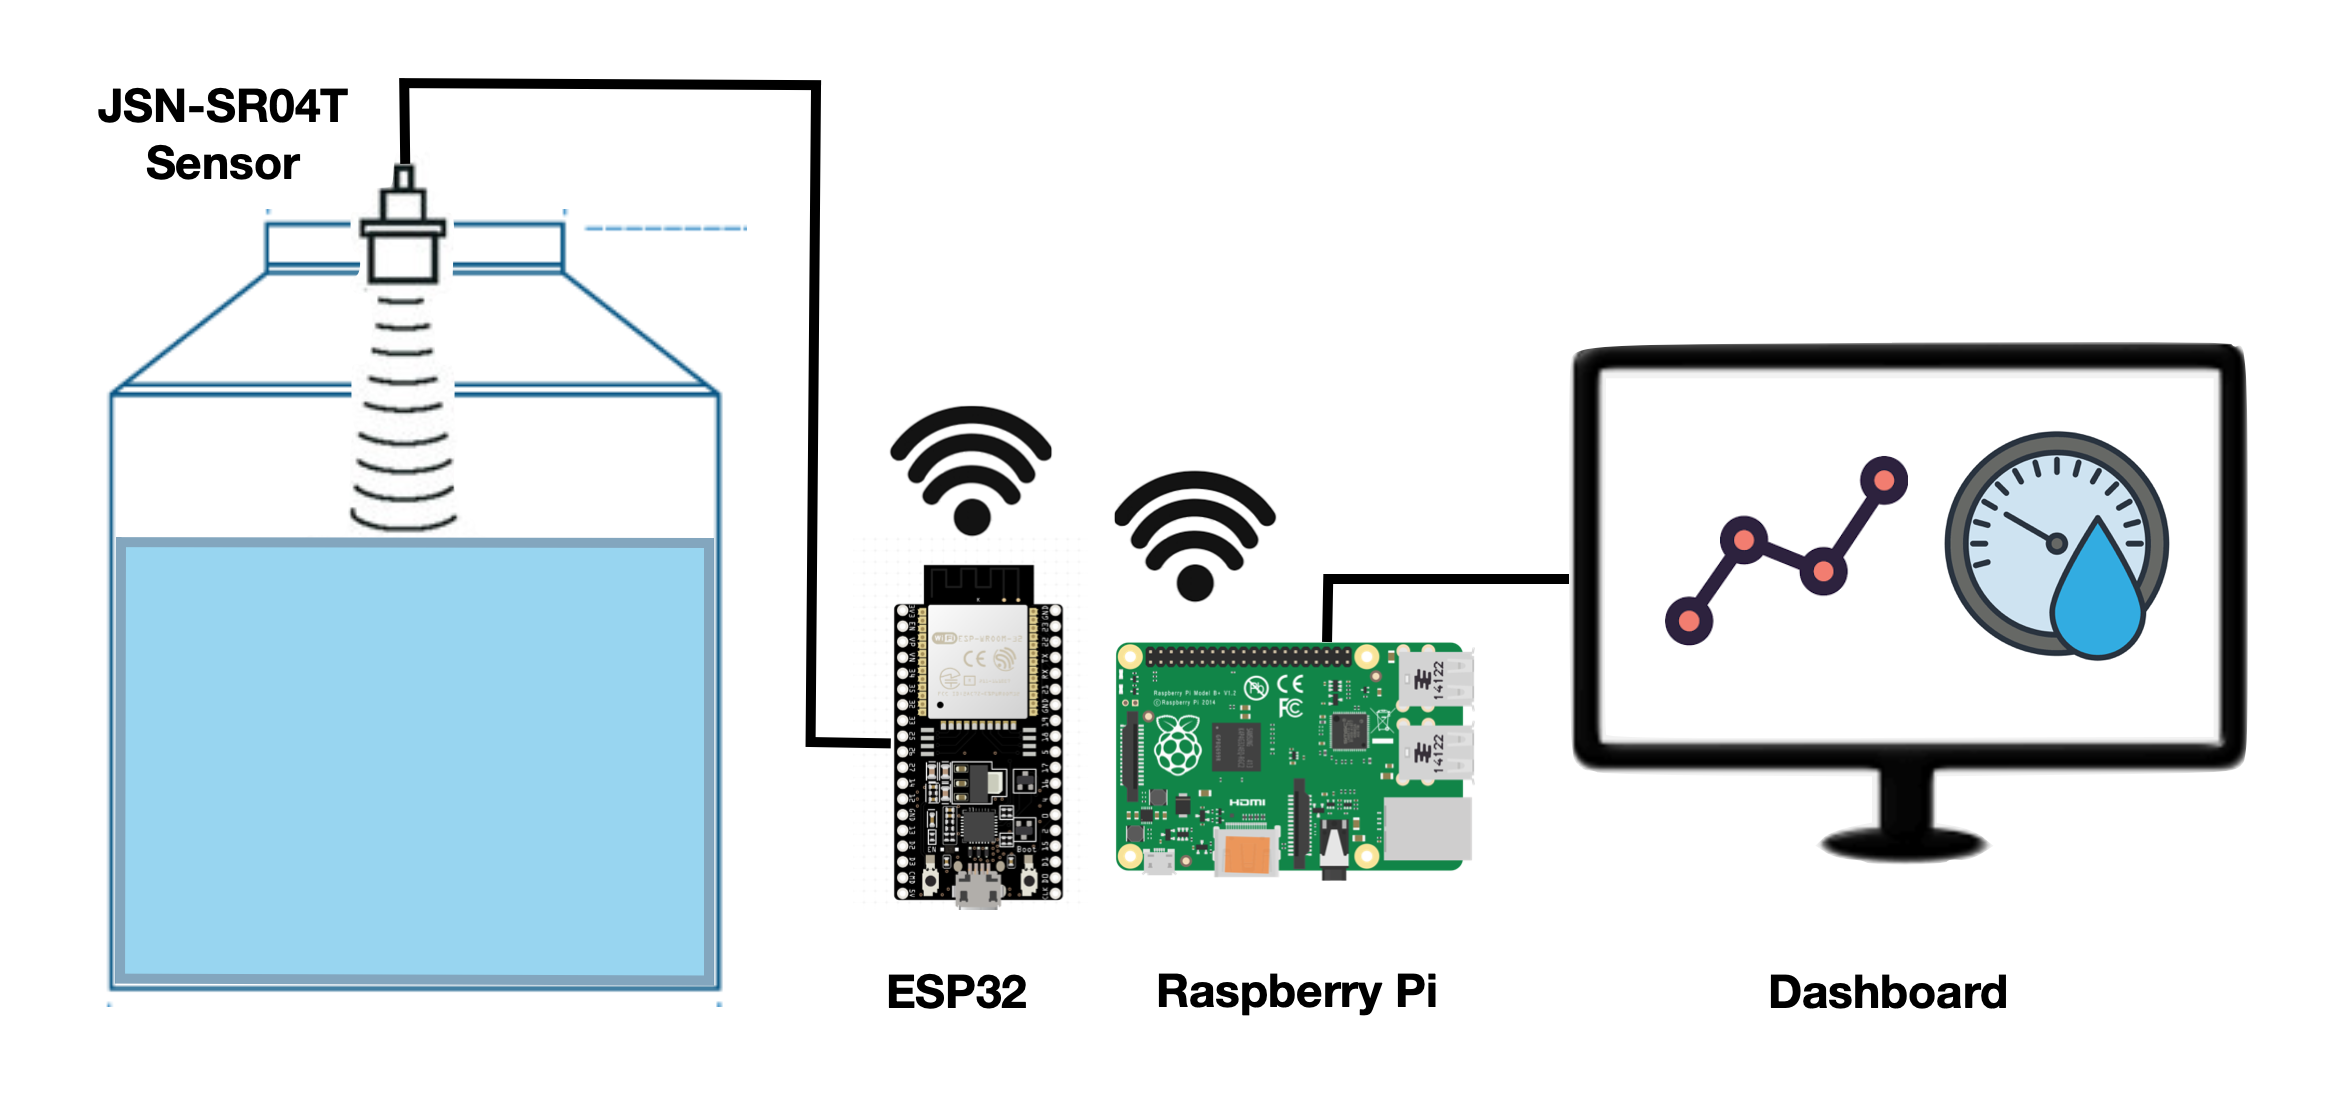 summary of the water IoT water level monitor setup.